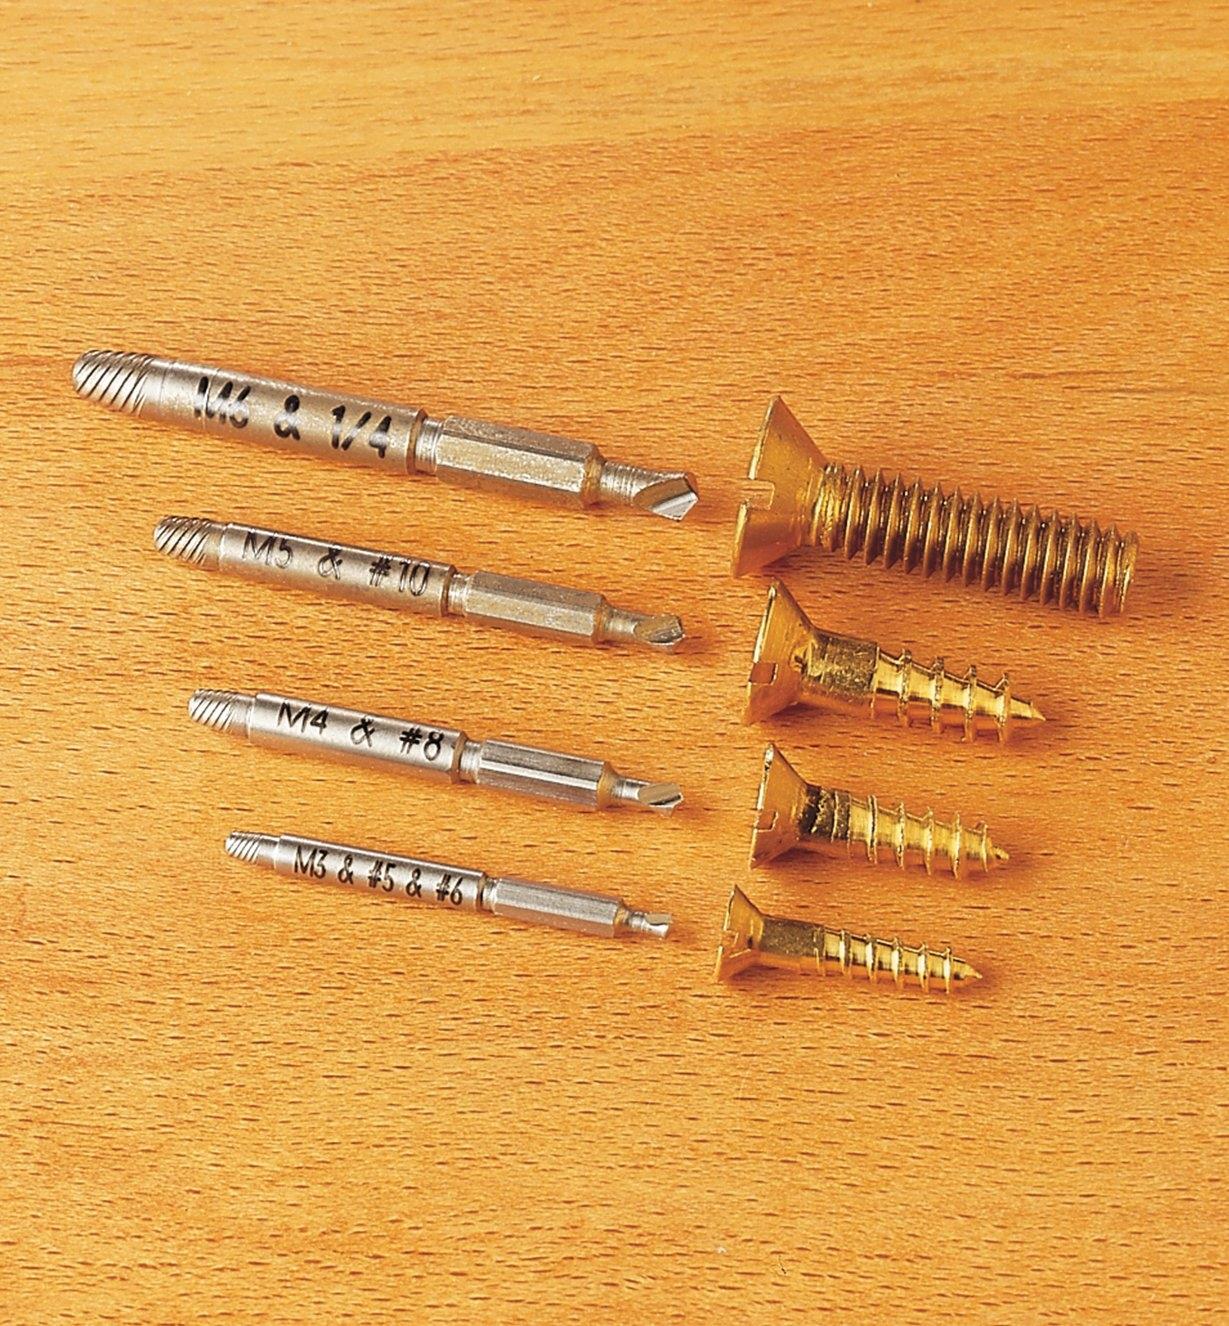 Extractors with corresponding sizes of screws and bolts